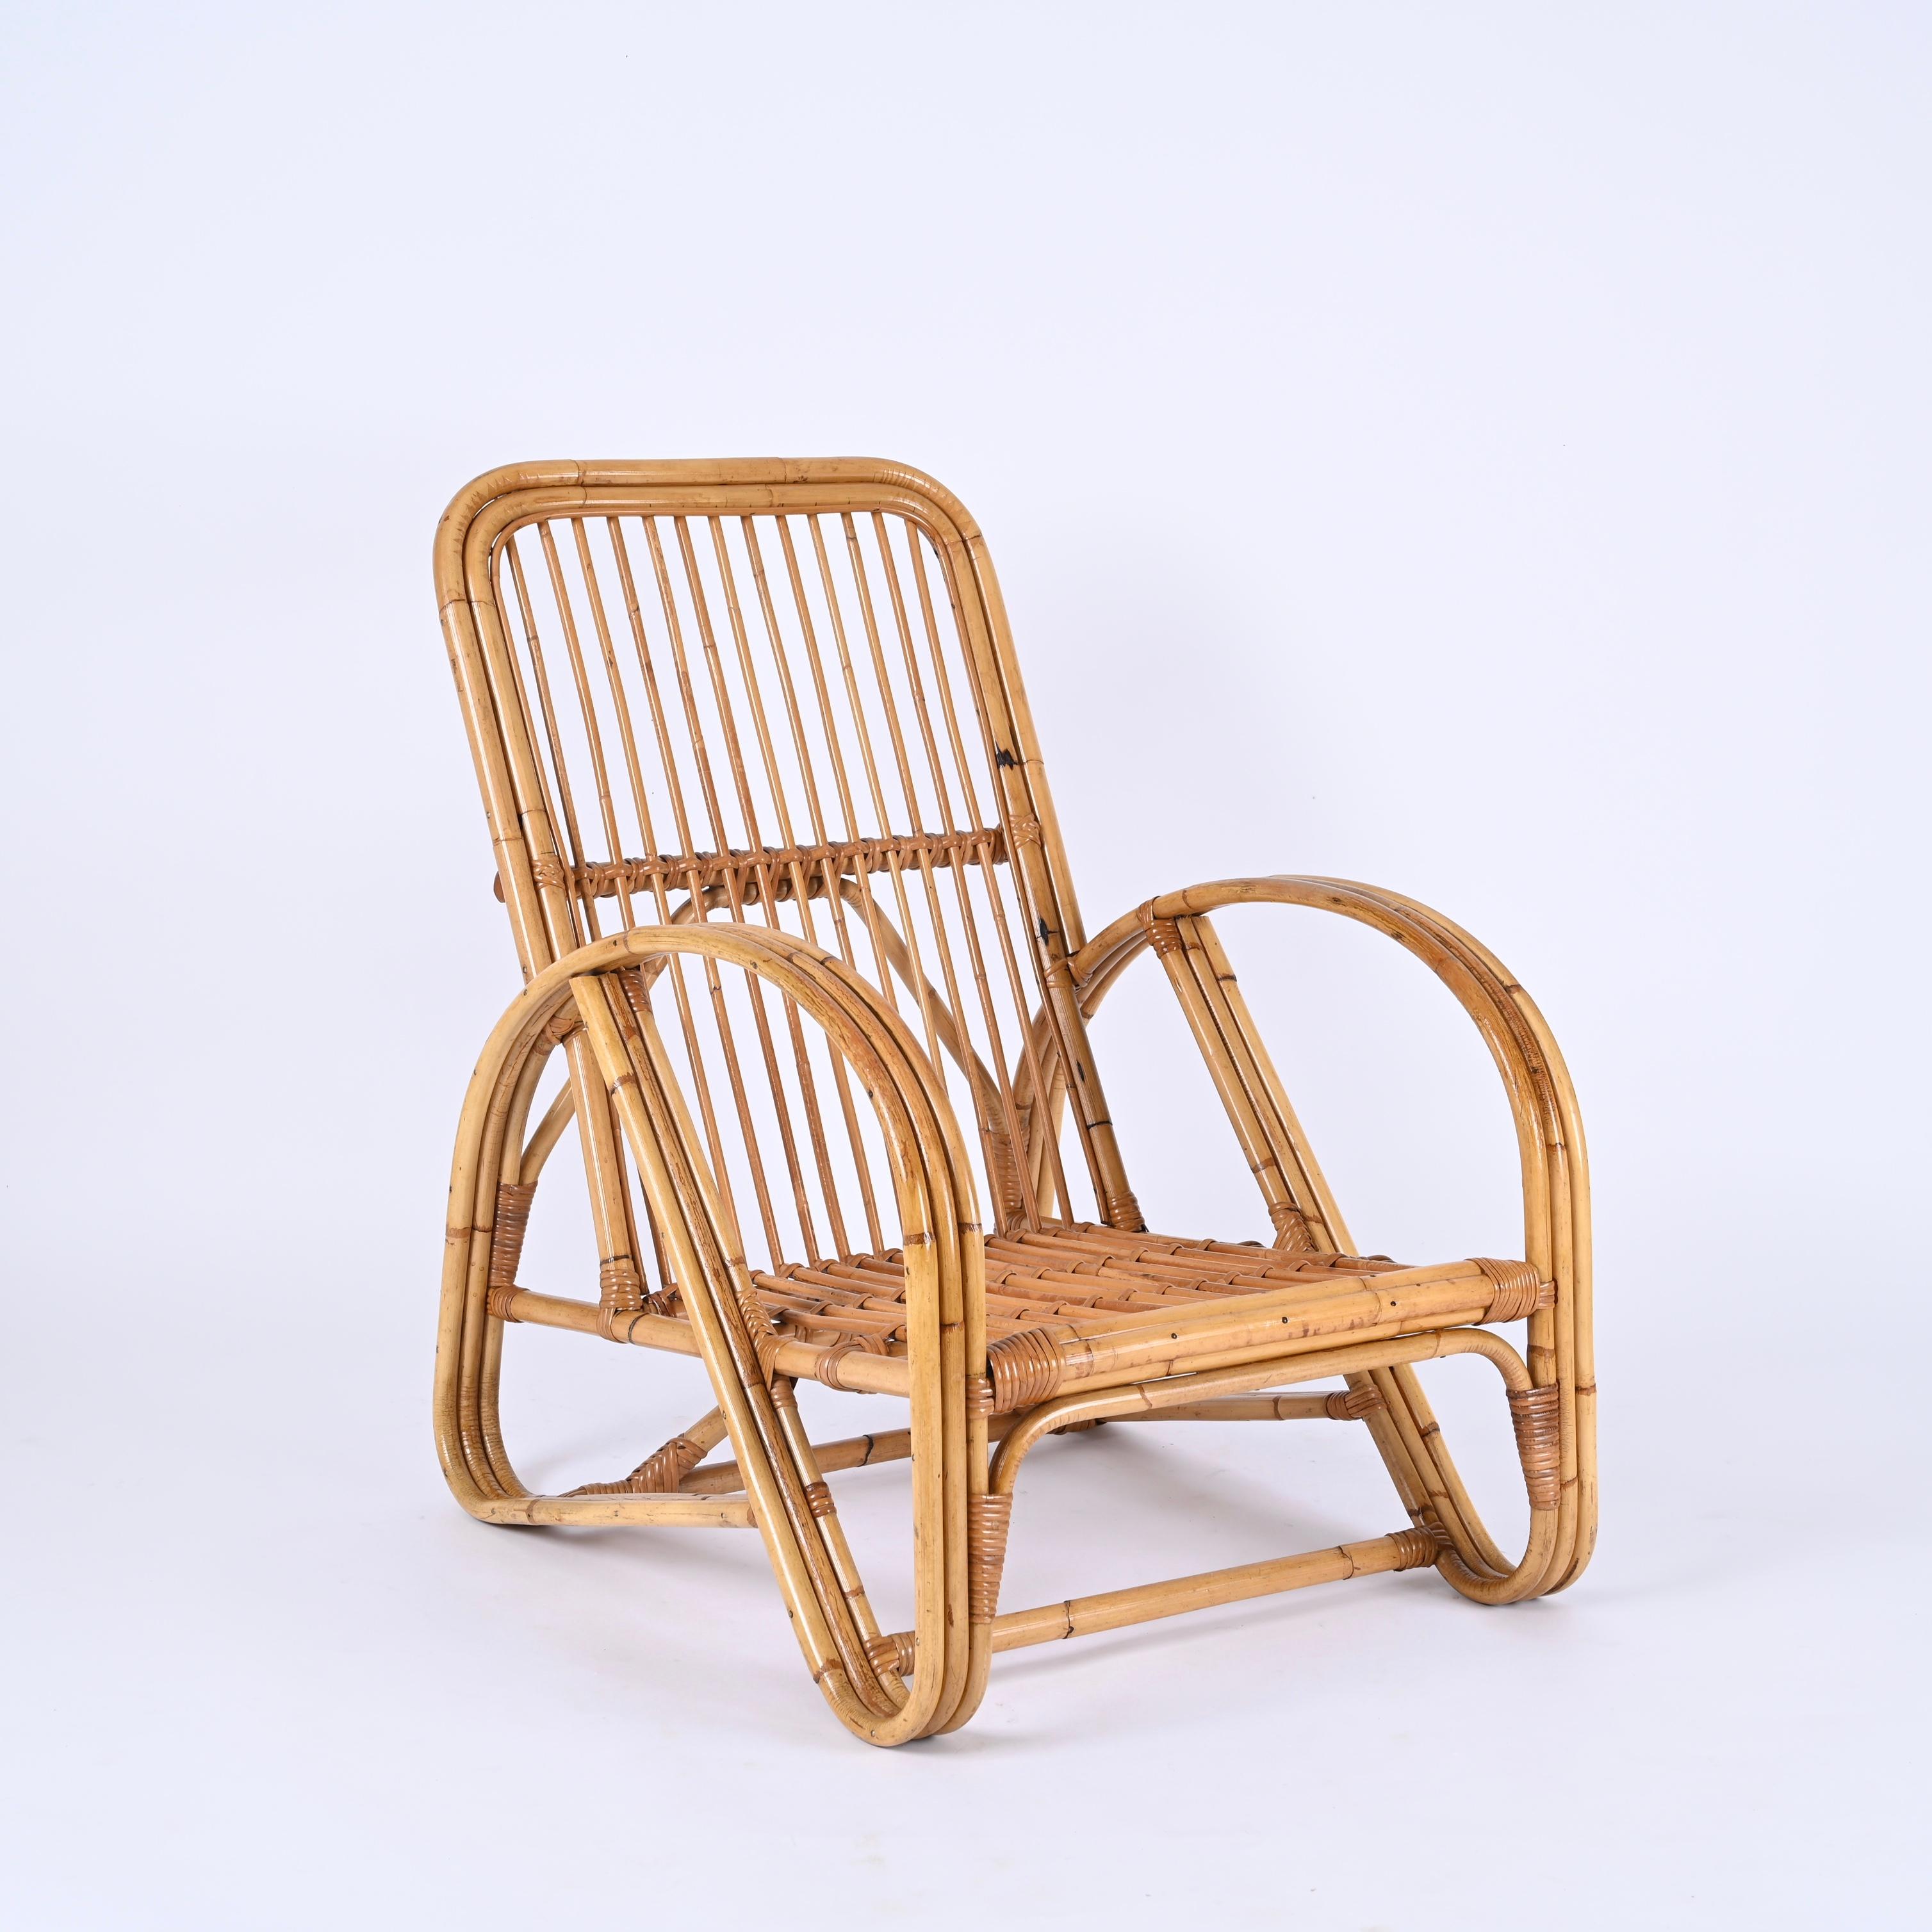 Vivai del Sud Mid-Century Italian Bamboo and Rattan Armchair, Italy 1970s For Sale 8